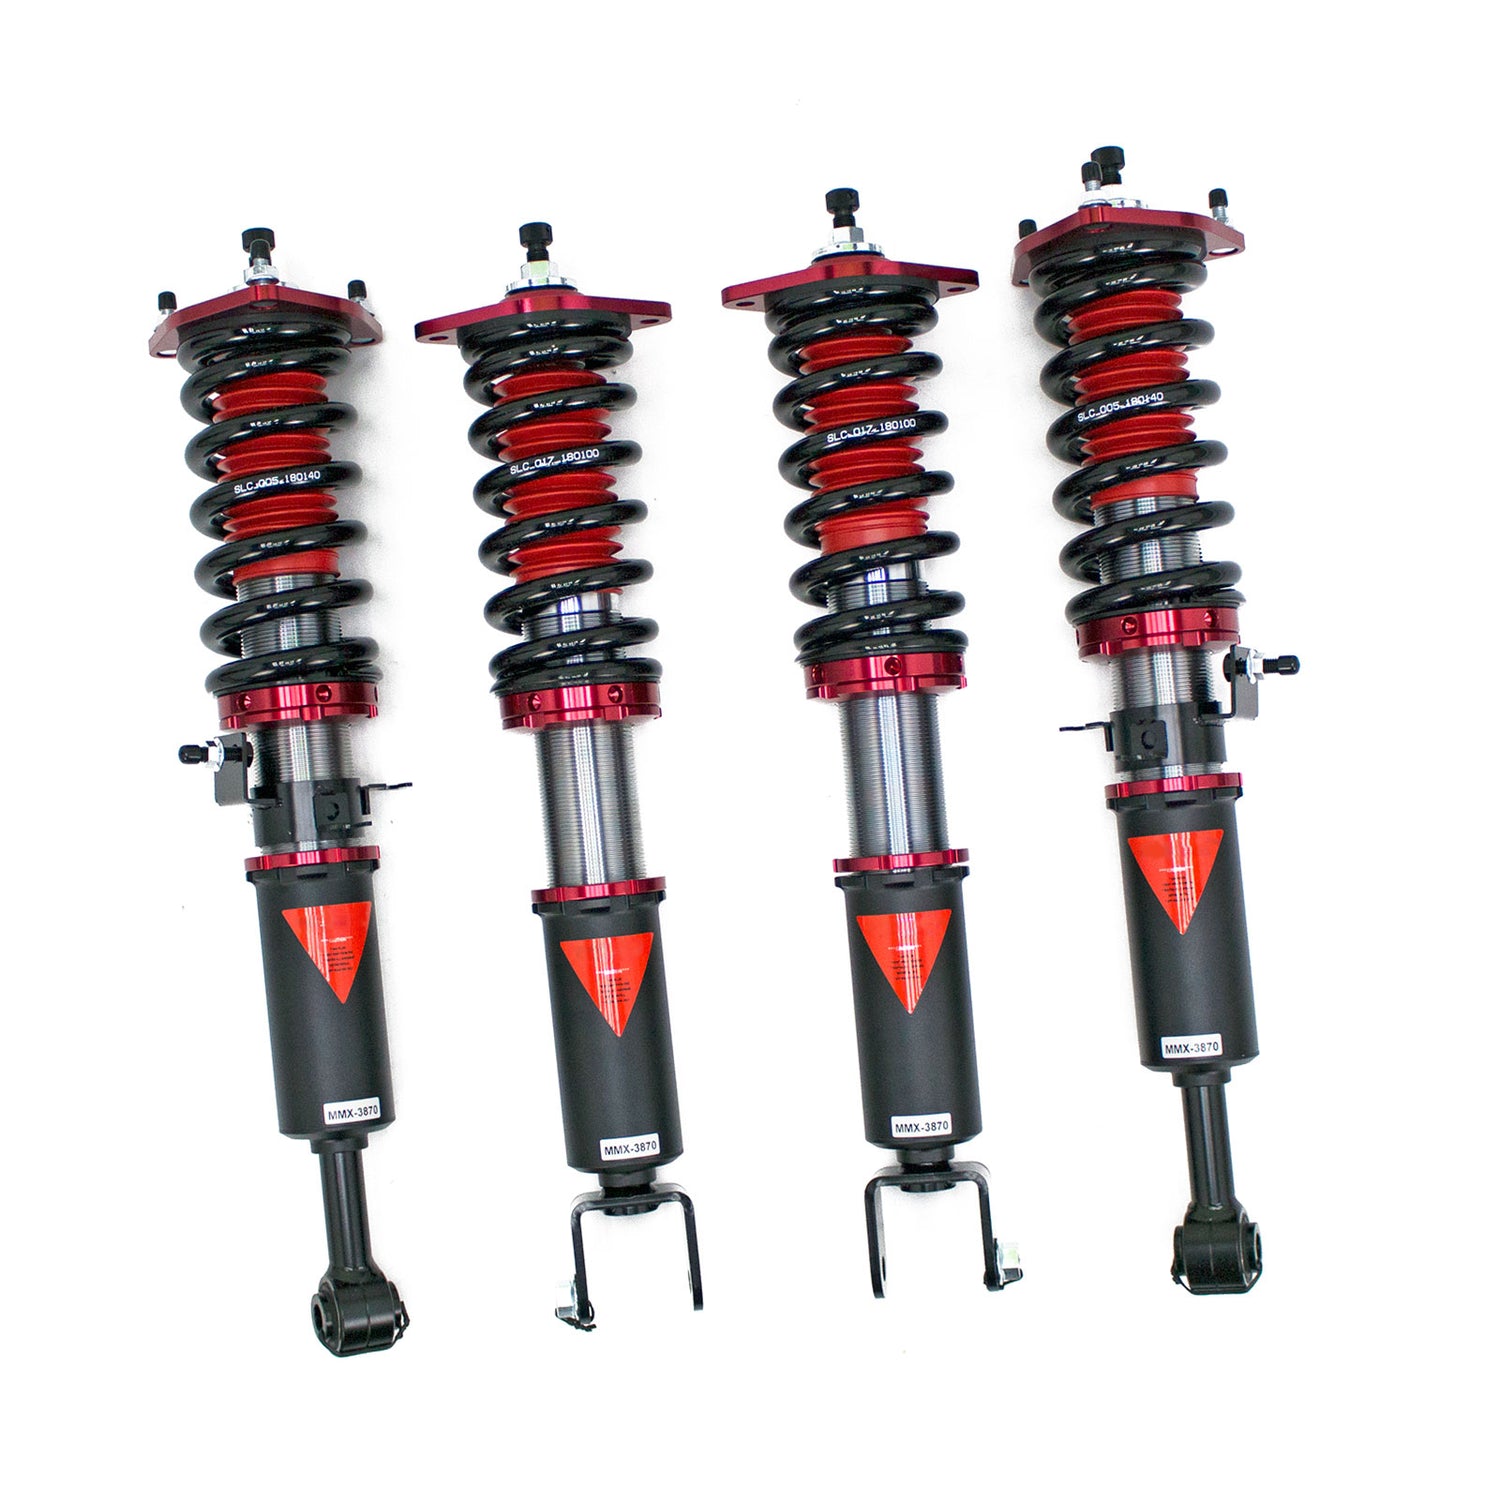 MMX3870-A MAXX Coilovers Lowering Kit, Fully Adjustable, Ride Height, 40 Clicks Rebound Settings, Nissan 370Z(Z34) 2009-18